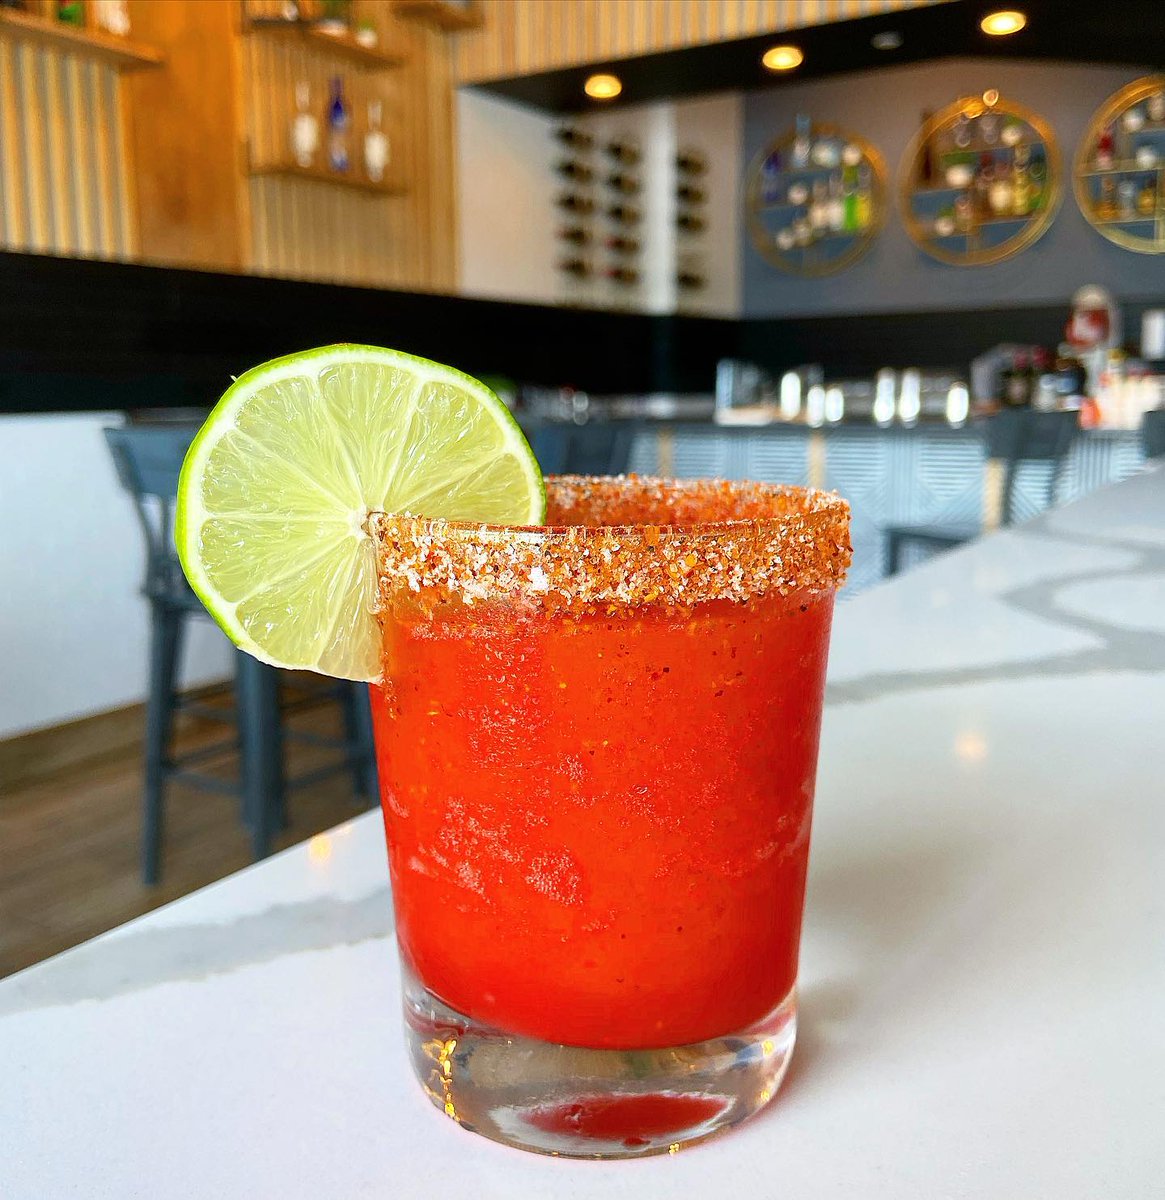 TGIF! 🍹❤️ #LoveLoudoun Kick off the weekend by visiting La Prensa and ordering one of their delicious margs!